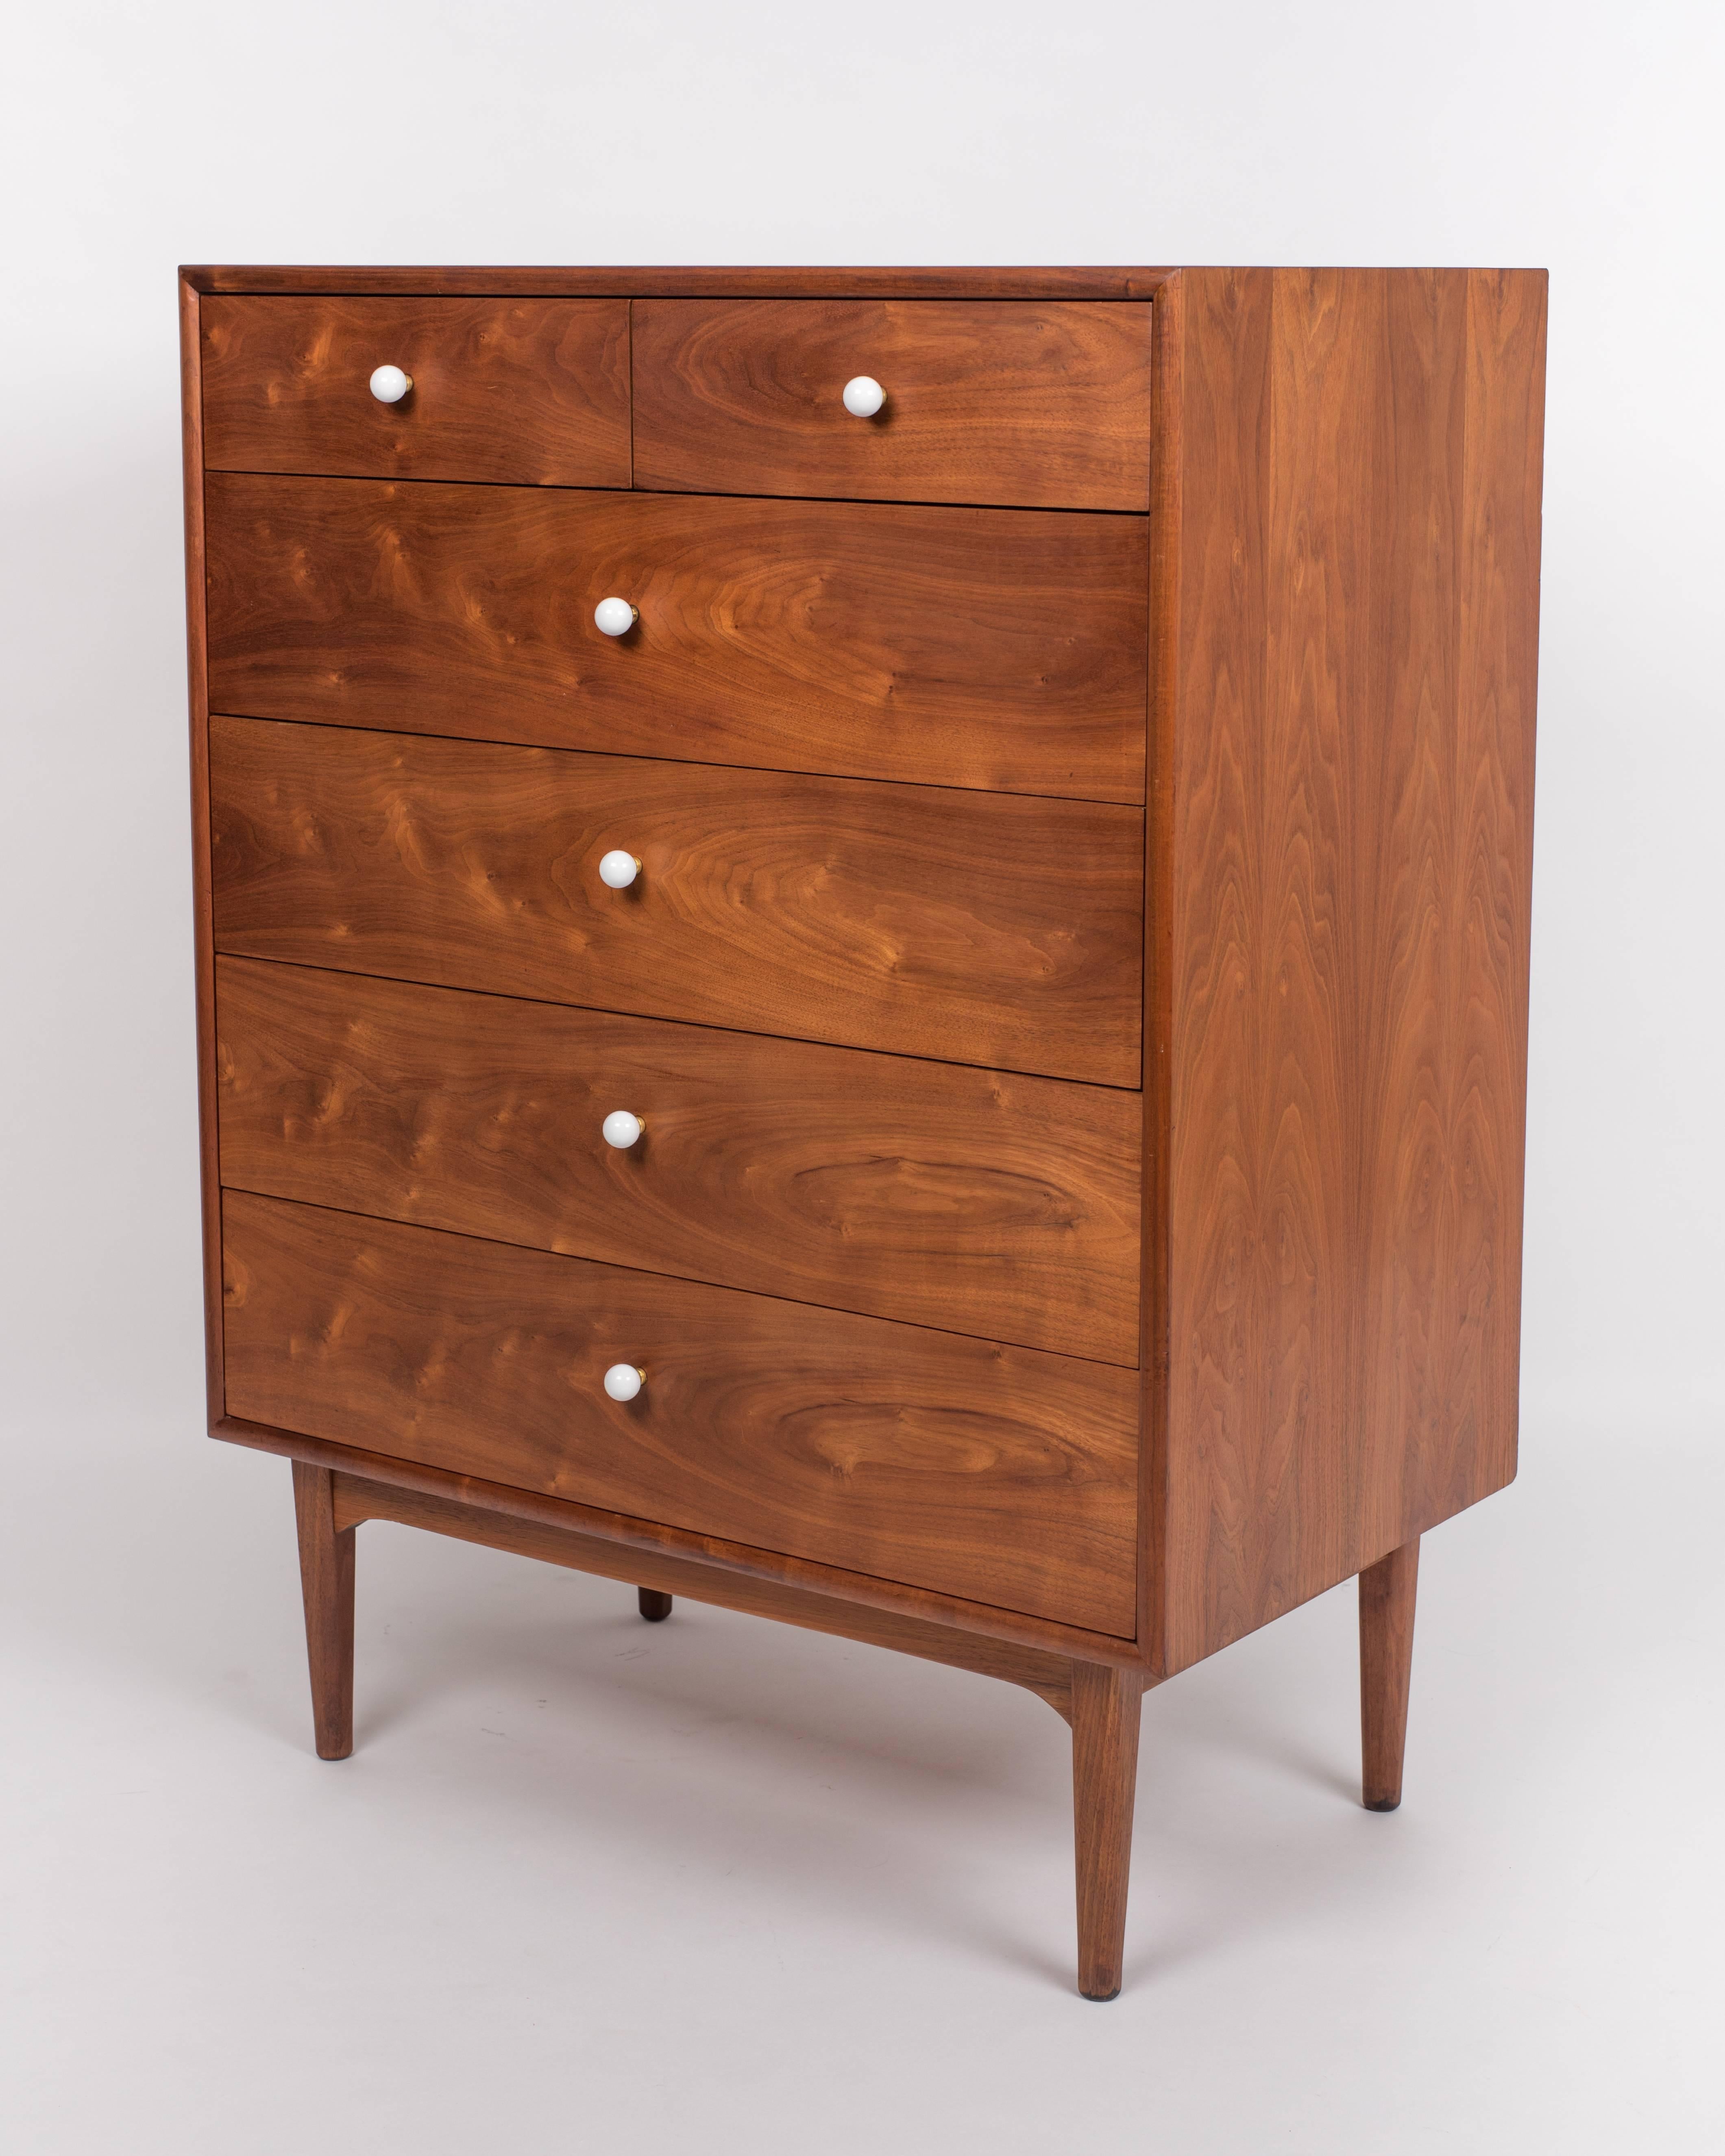 Walnut dresser from Drexel’s popular Declaration collection by Kipp Stewart and Stewart MacDougall. This example is a walnut case highboy style, holding six-drawers with original white ceramic knobs on brass spacers. The stacks has four large